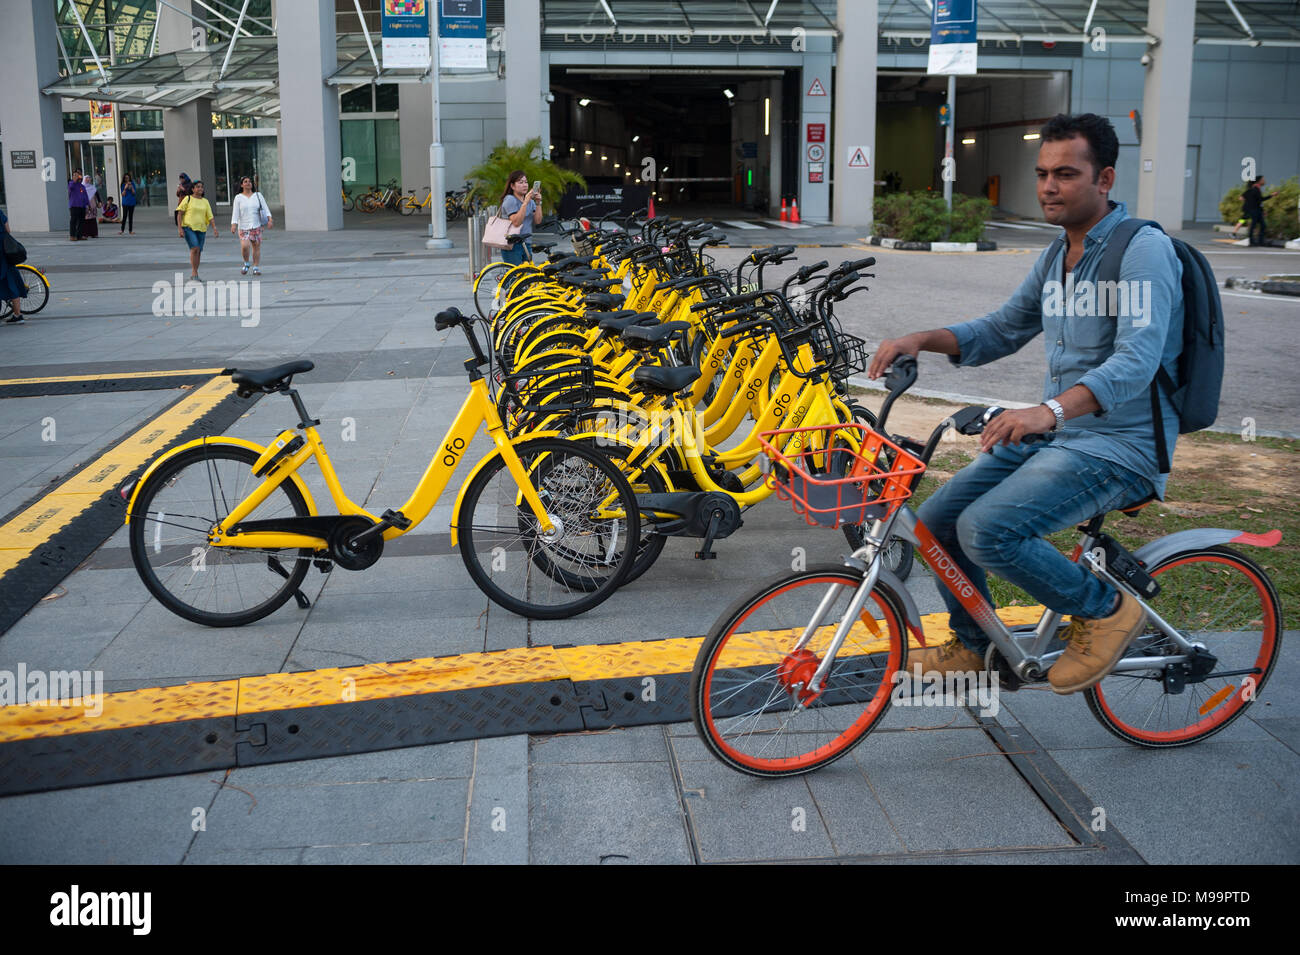 22.03.2018, Singapore, Republic of Singapore, Asia - A man rides on his rental  bicycle past parked rental bikes in Marina Bay Stock Photo - Alamy